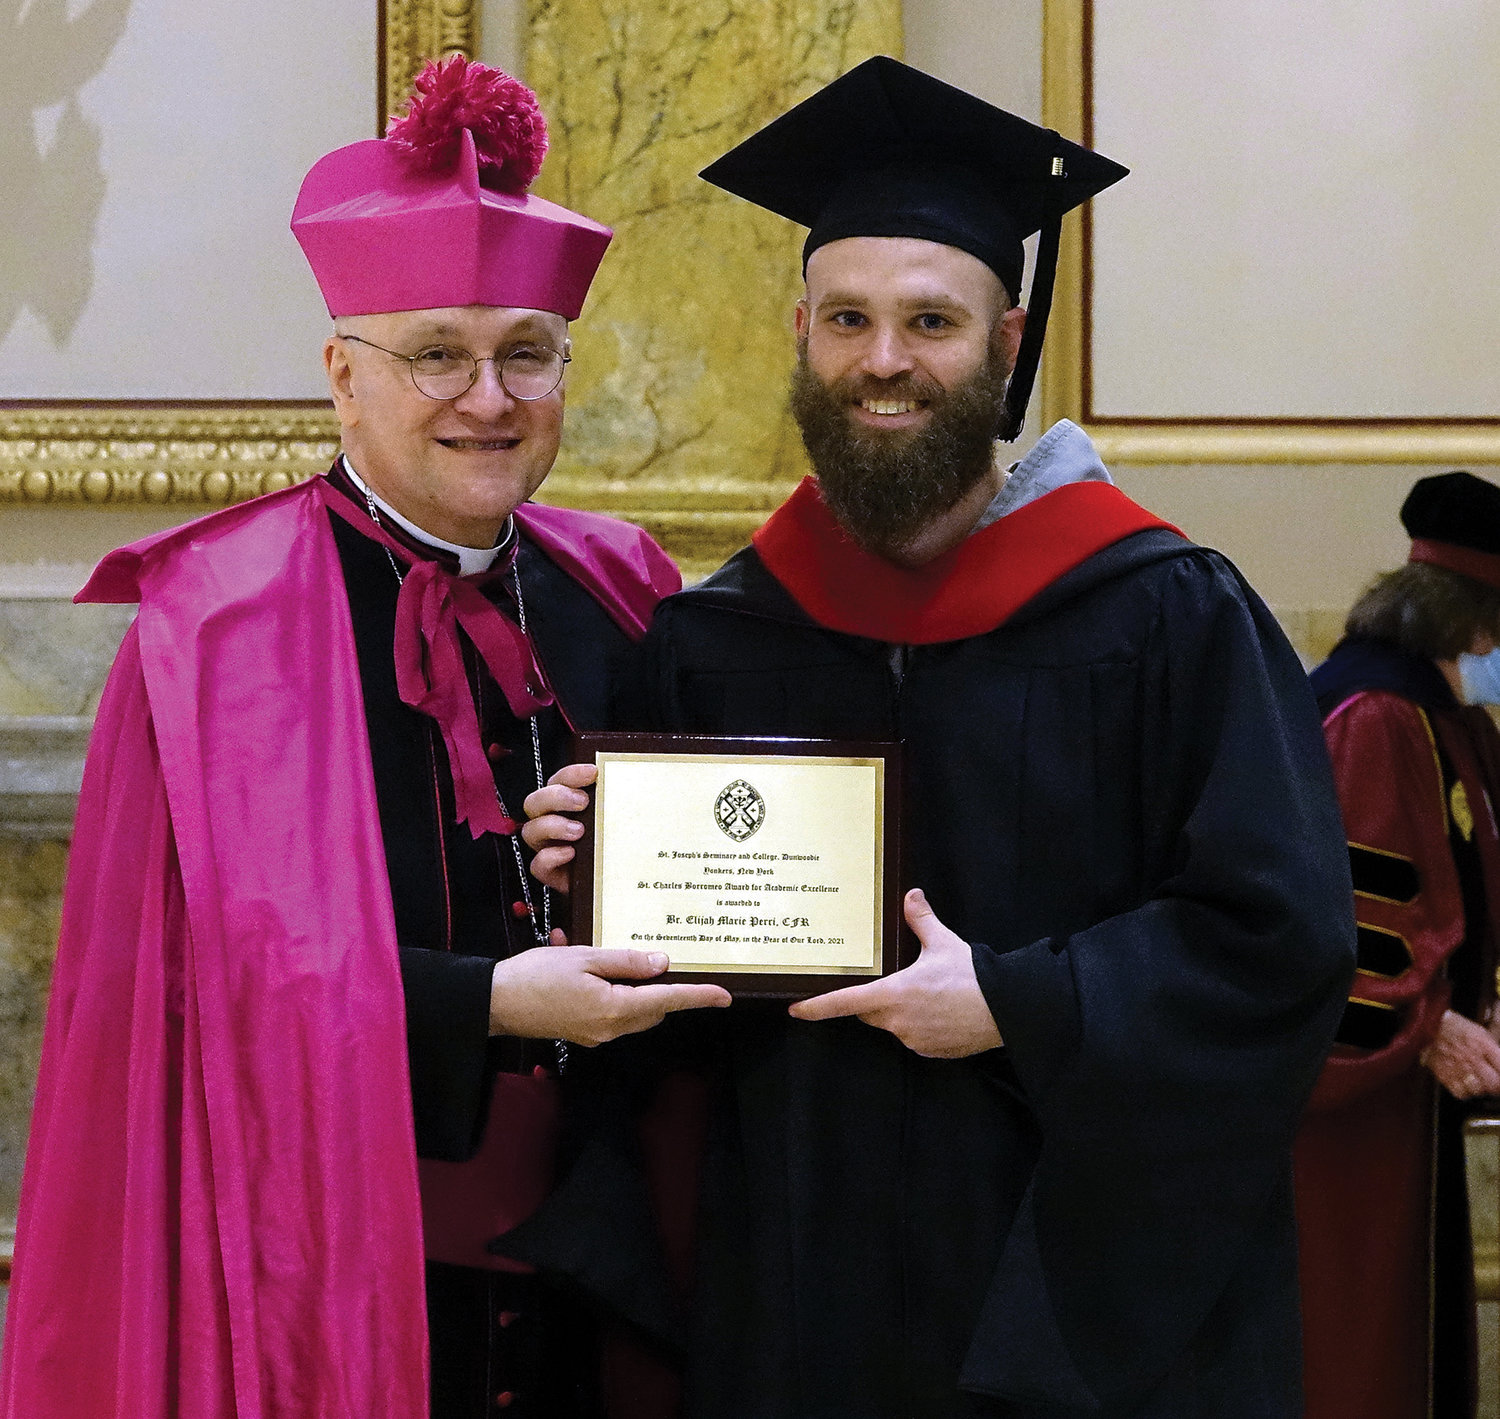 Bishop Massa presents Father Elijah Marie Perri, C.F.R., with the St. Charles Borromeo Award for Academic Excellence.